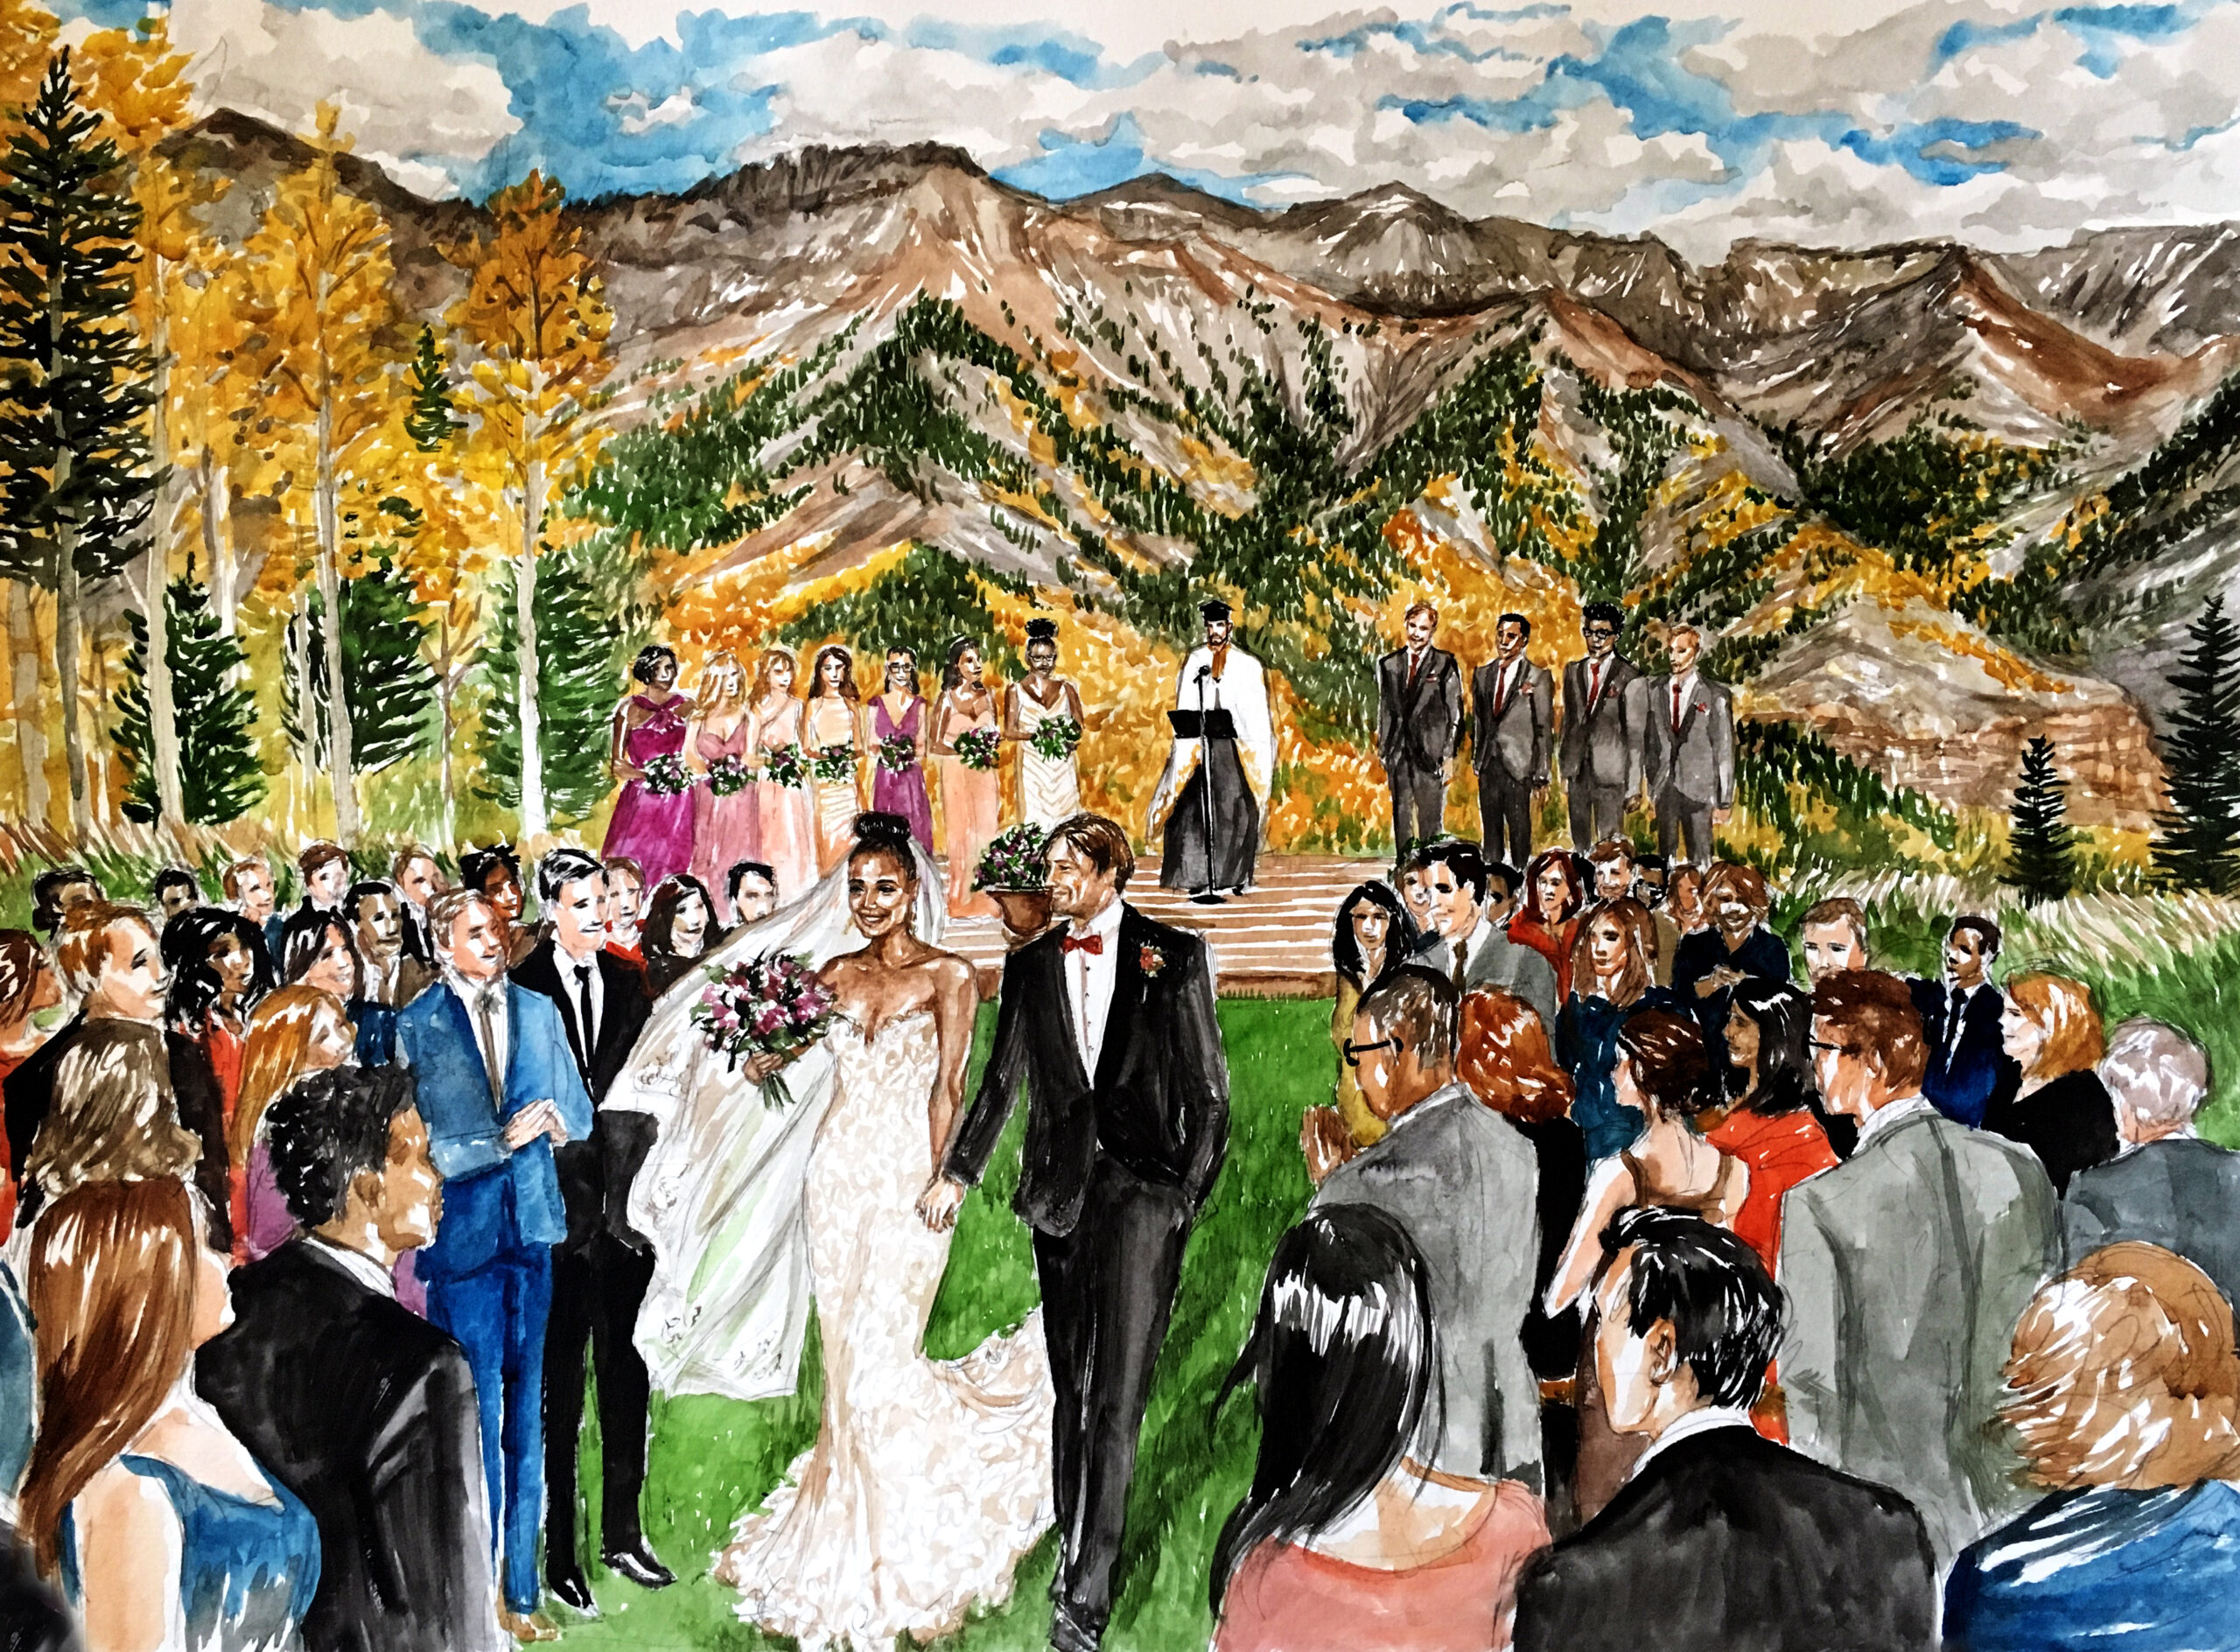 Love Brushed on Canvas: A Painting for Wedding Extravaganza